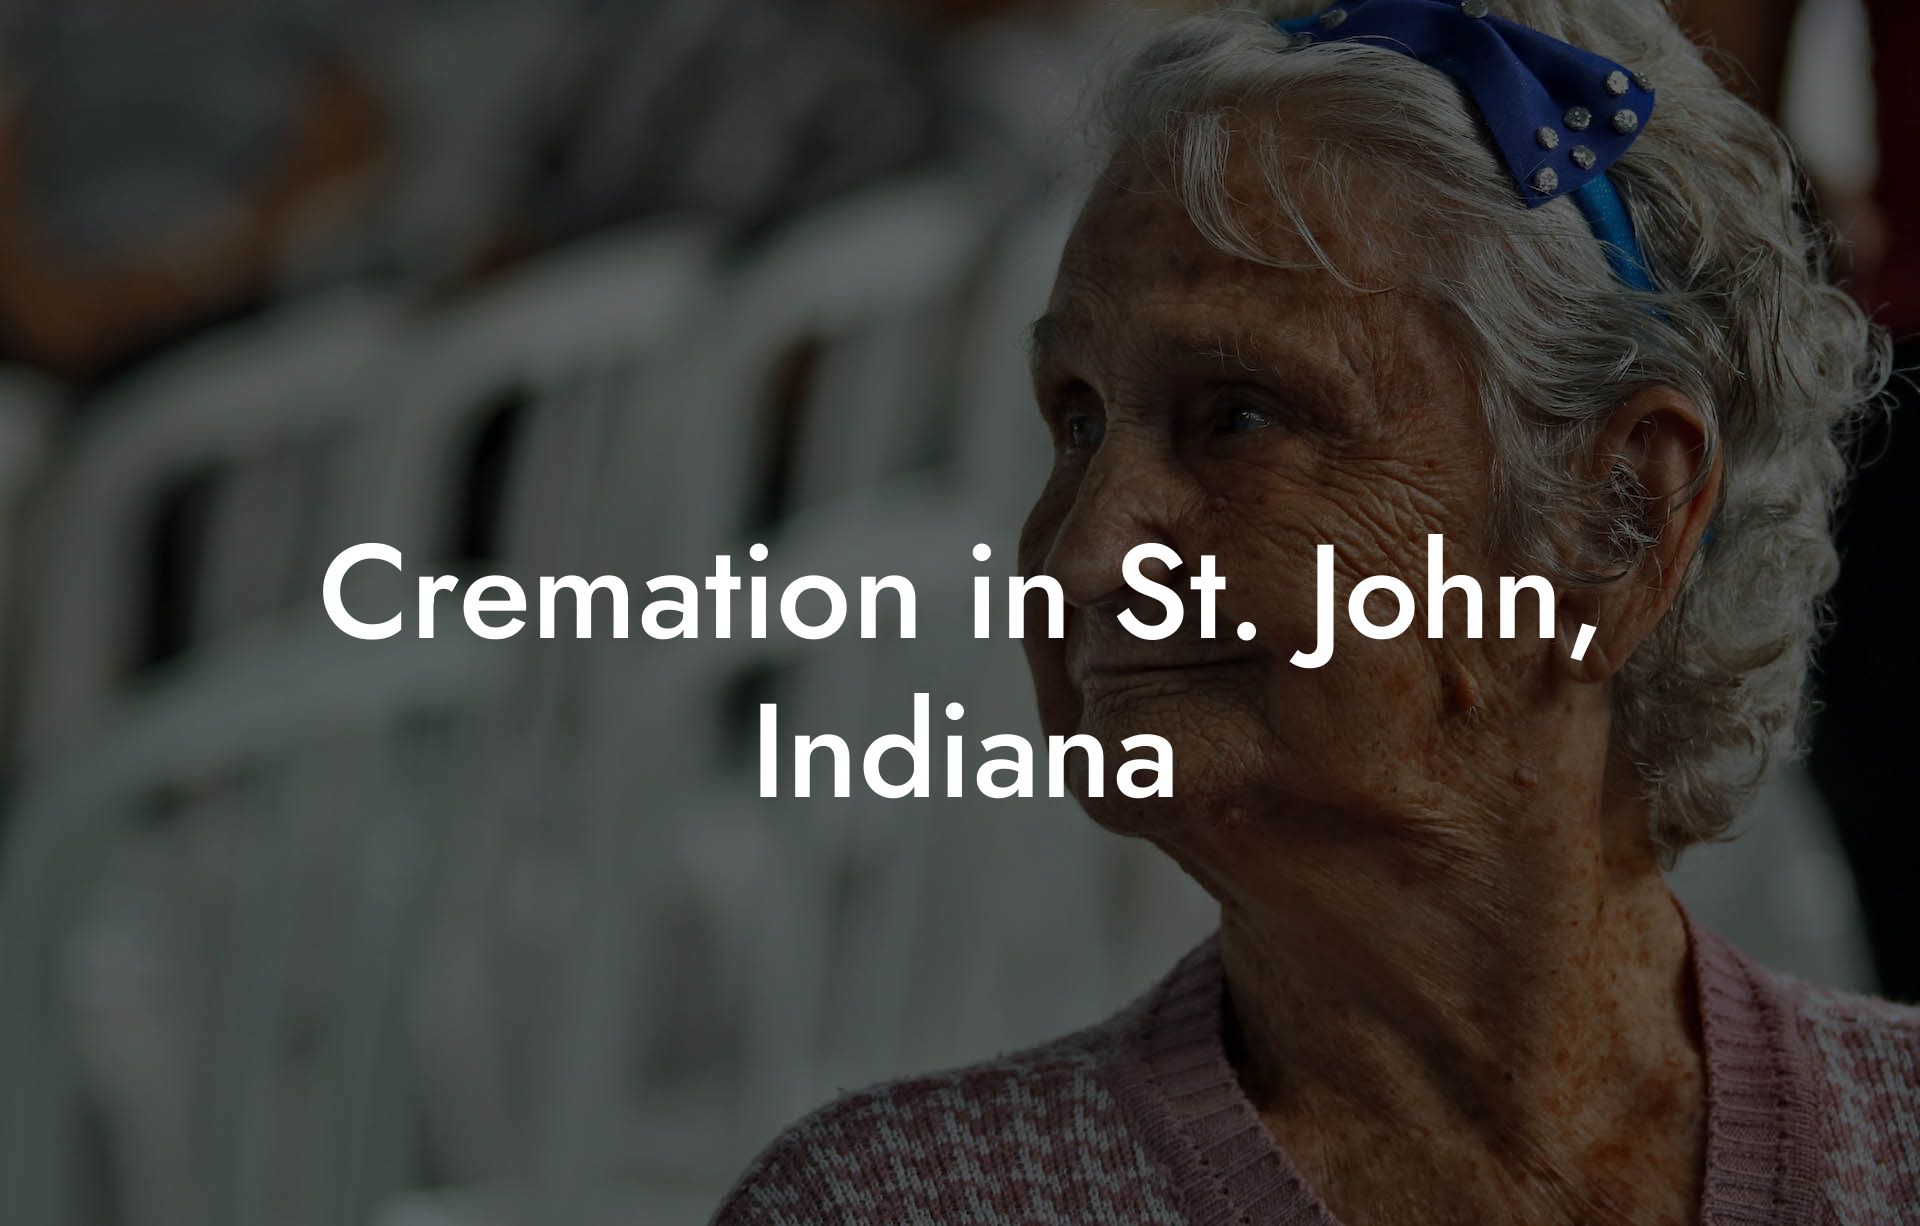 Cremation in St. John, Indiana